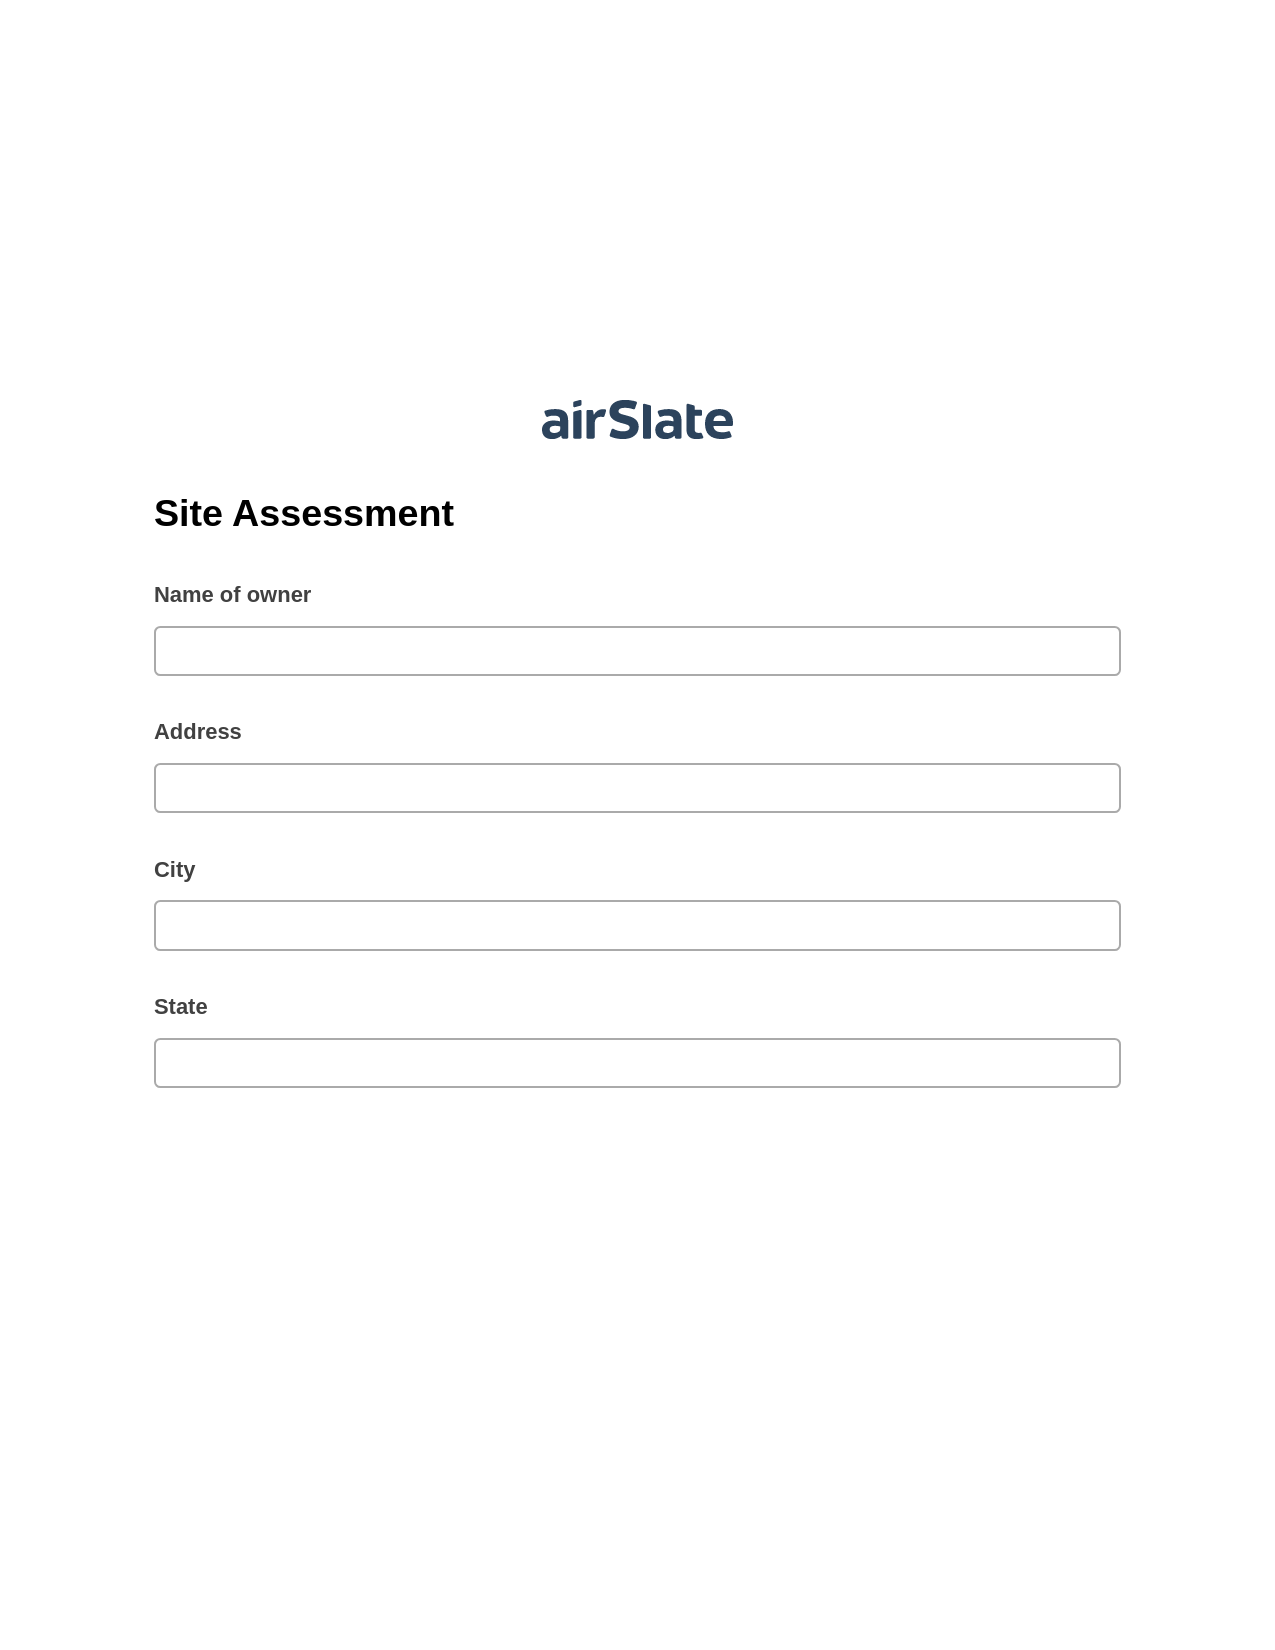 Site Assessment Pre-fill from Salesforce Record Bot, Email Notification Bot, Google Drive Bot